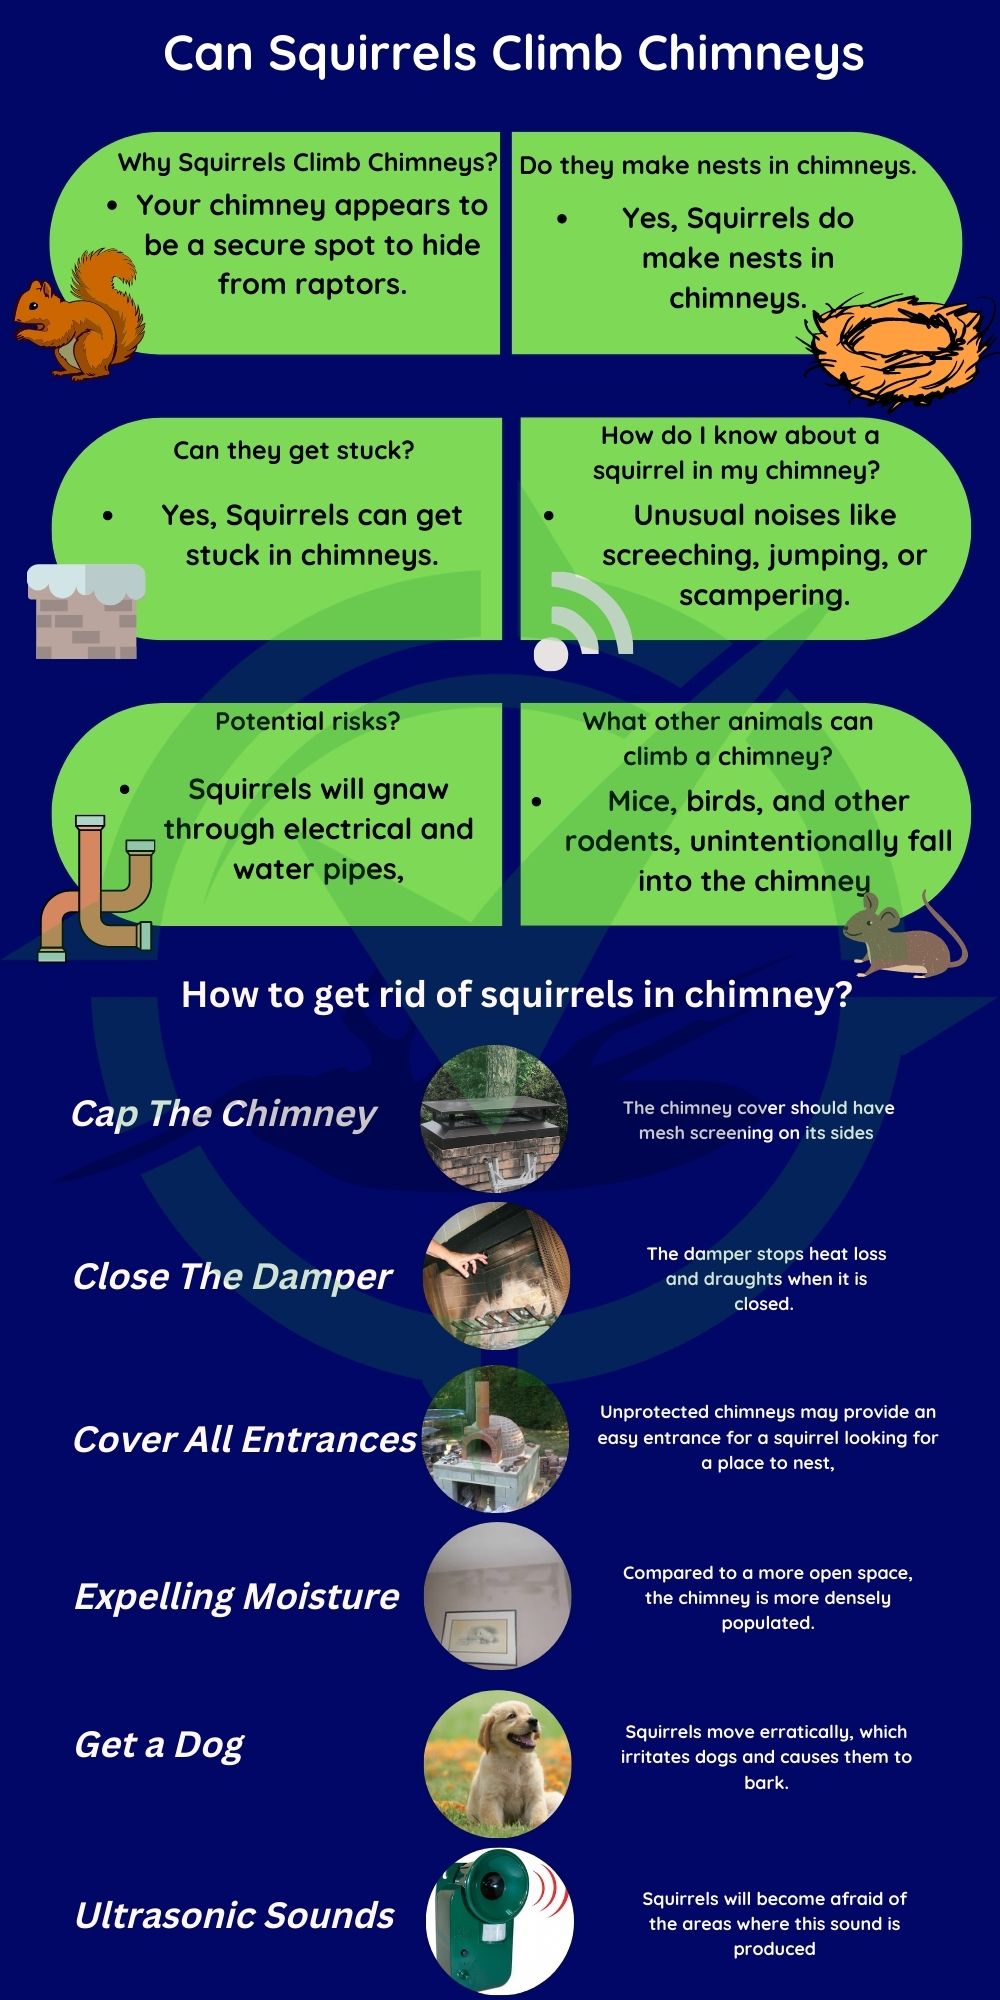 How to Stop Squirrels Climbing Up chimney